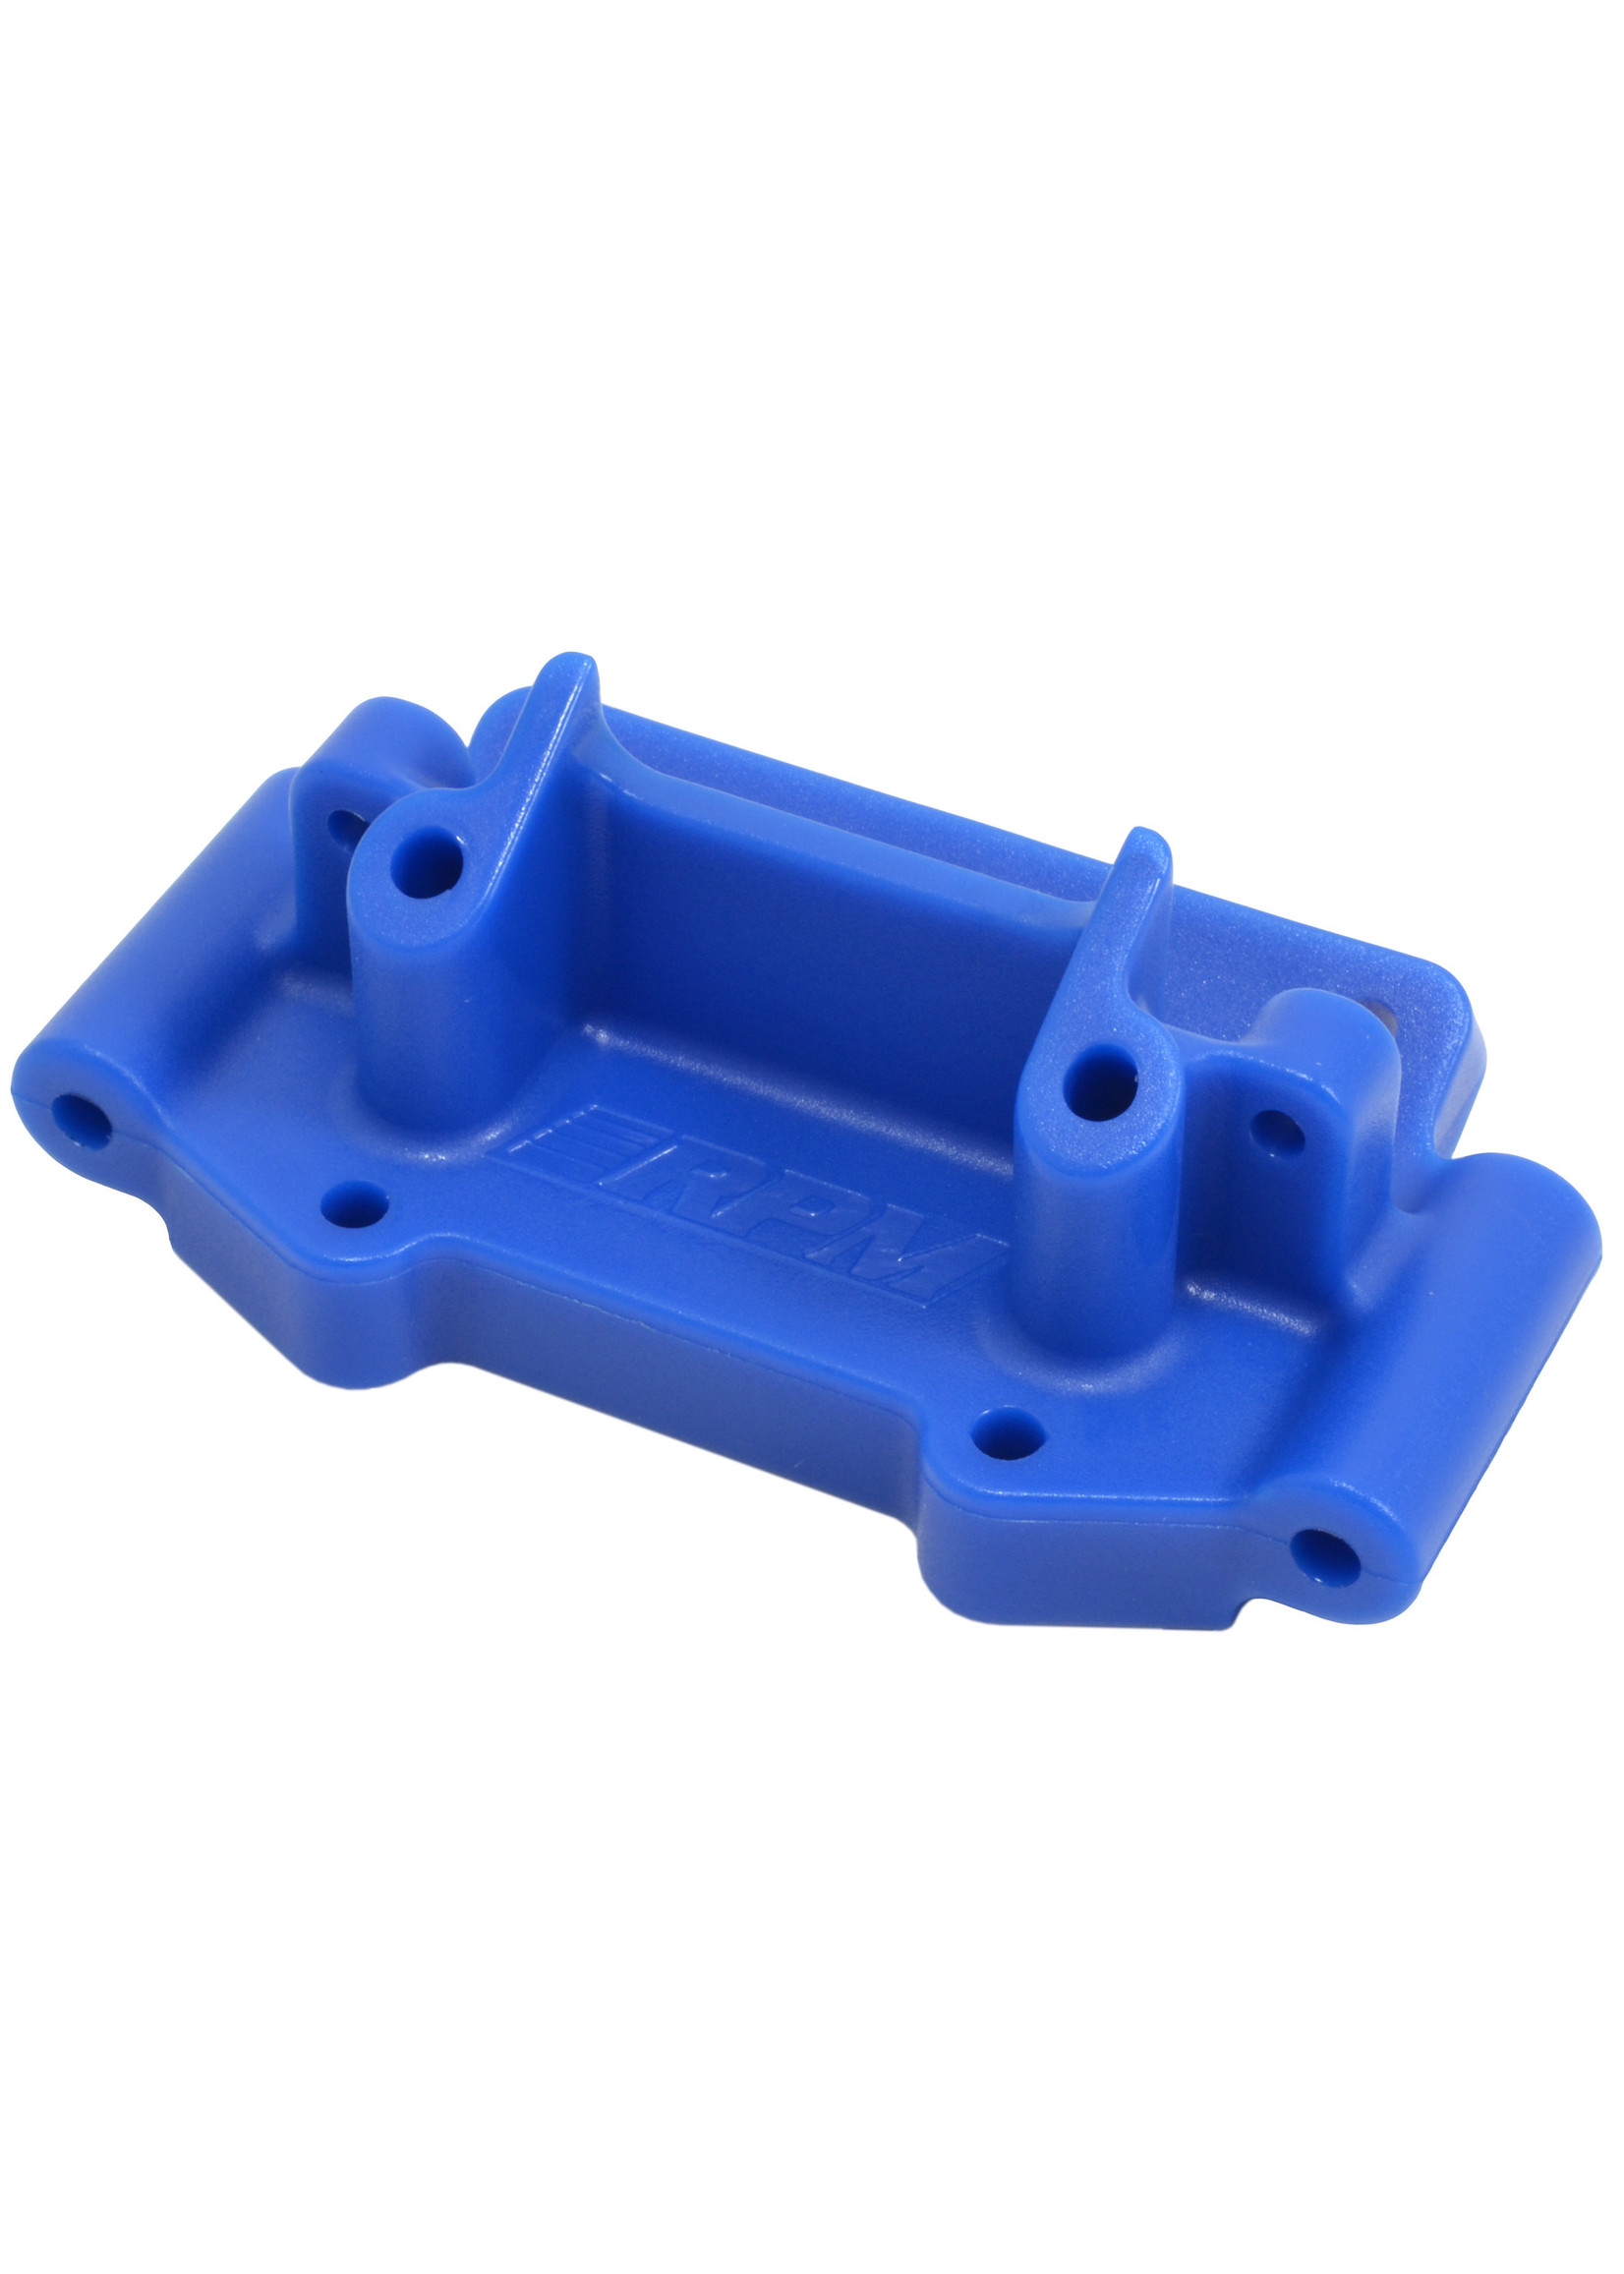 RPM 73755 - Front Bulkhead for 1/10 Traxxas 2WD - Blue